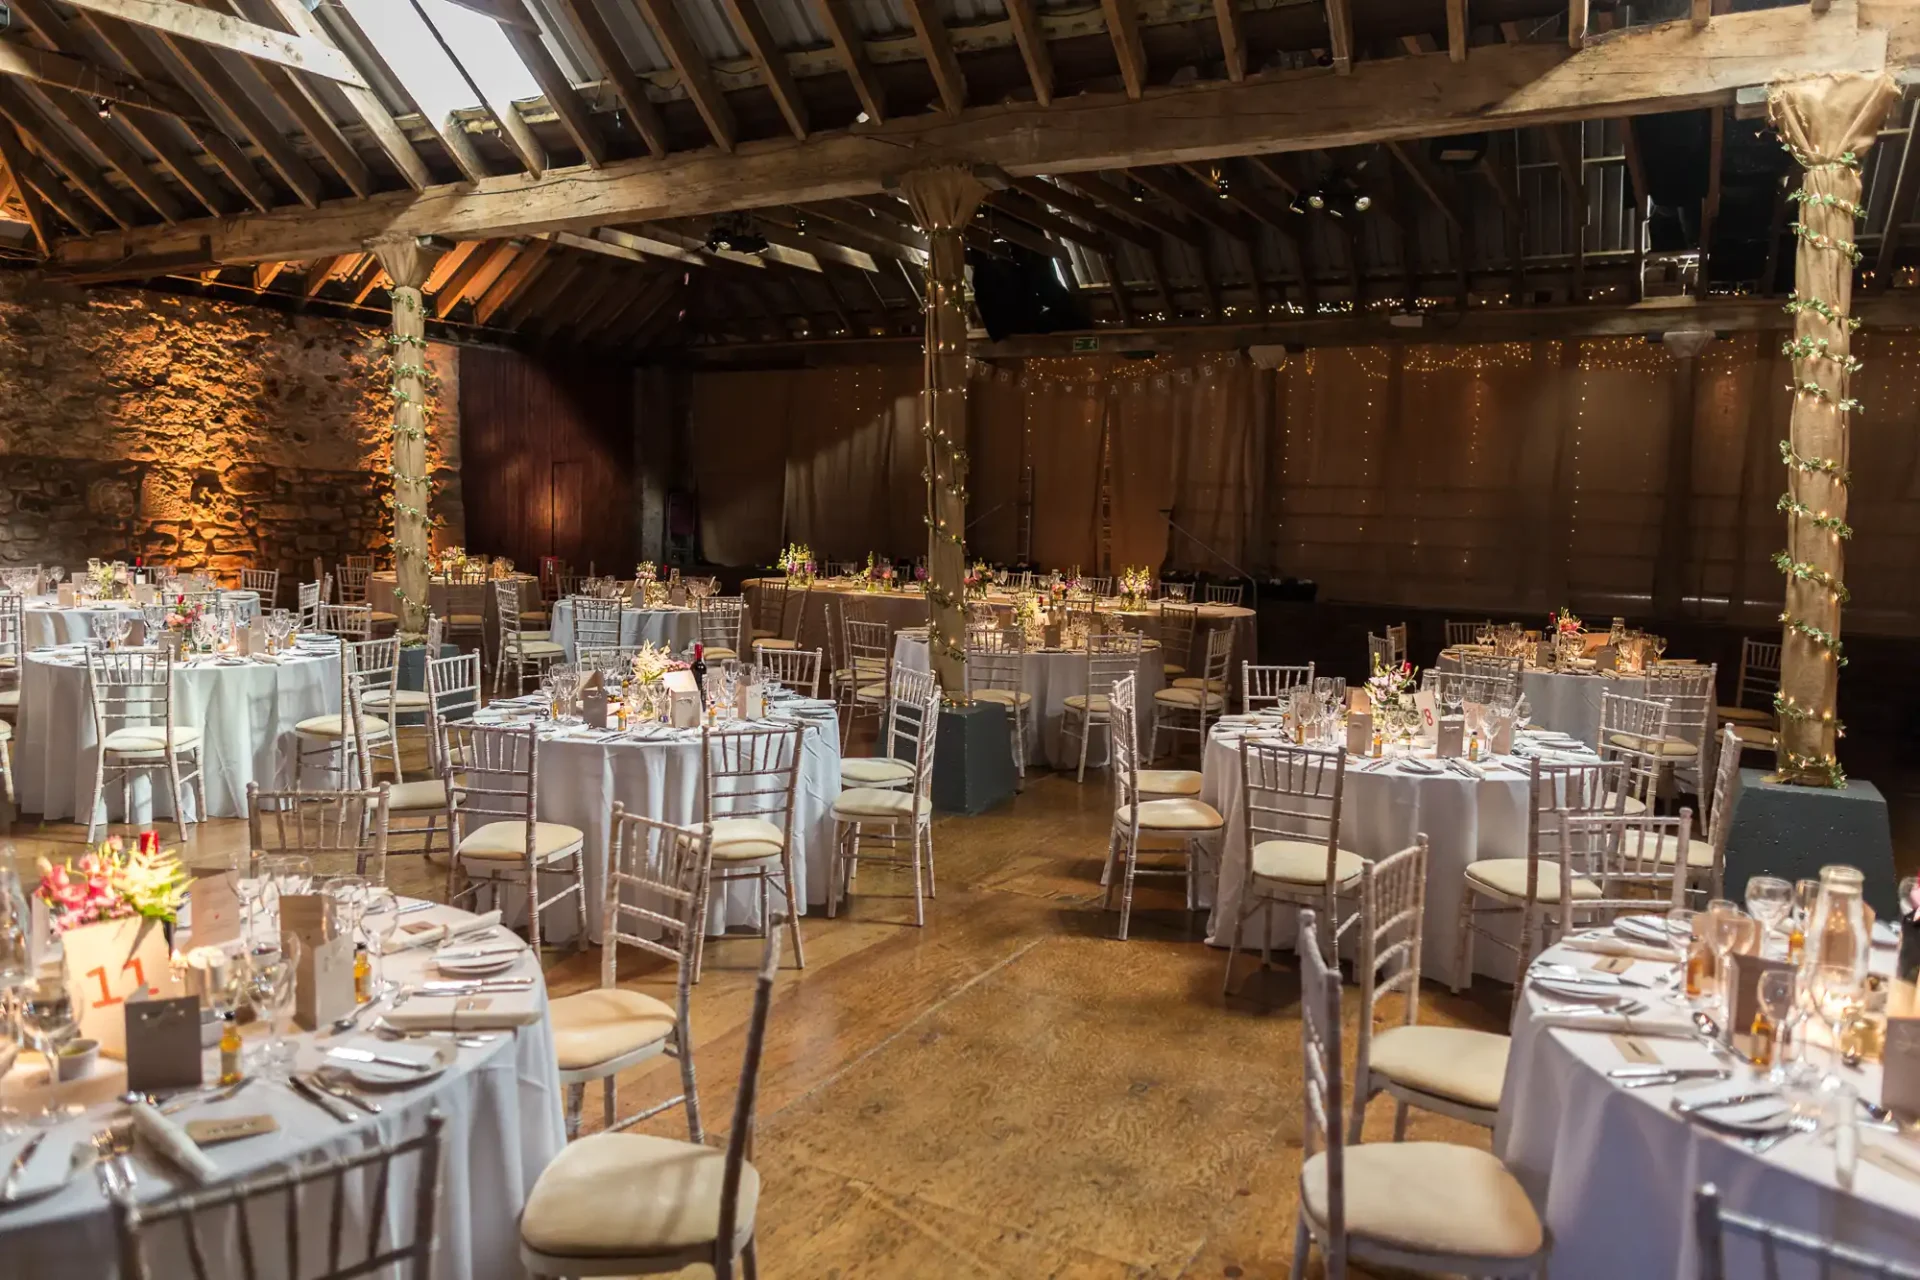 Elegant barn wedding venue with decorated tables, string lights, and exposed wooden beams.